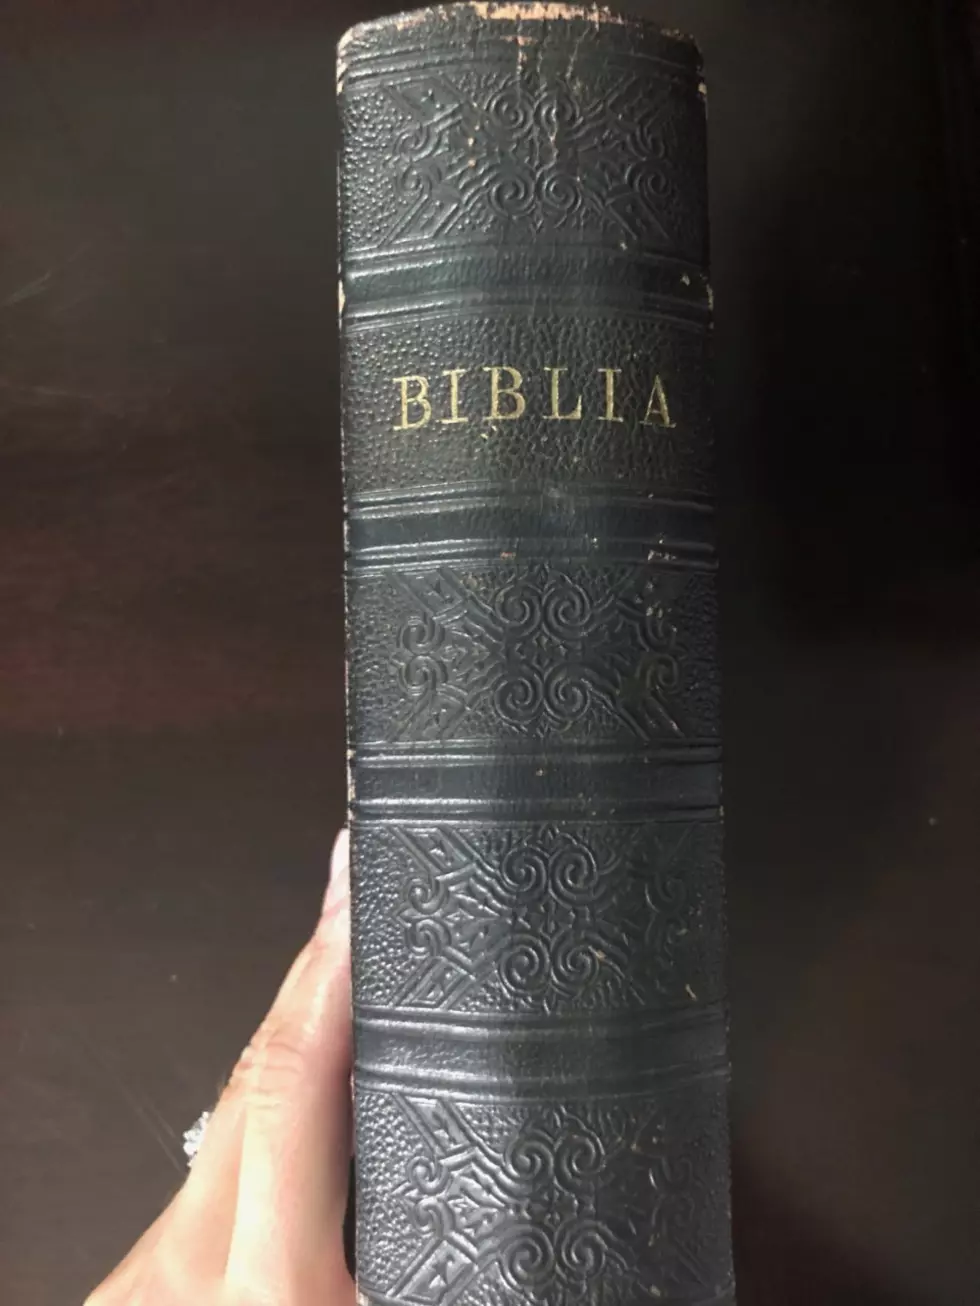 The Case of the Missing 1850’s Bible Has Been Solved